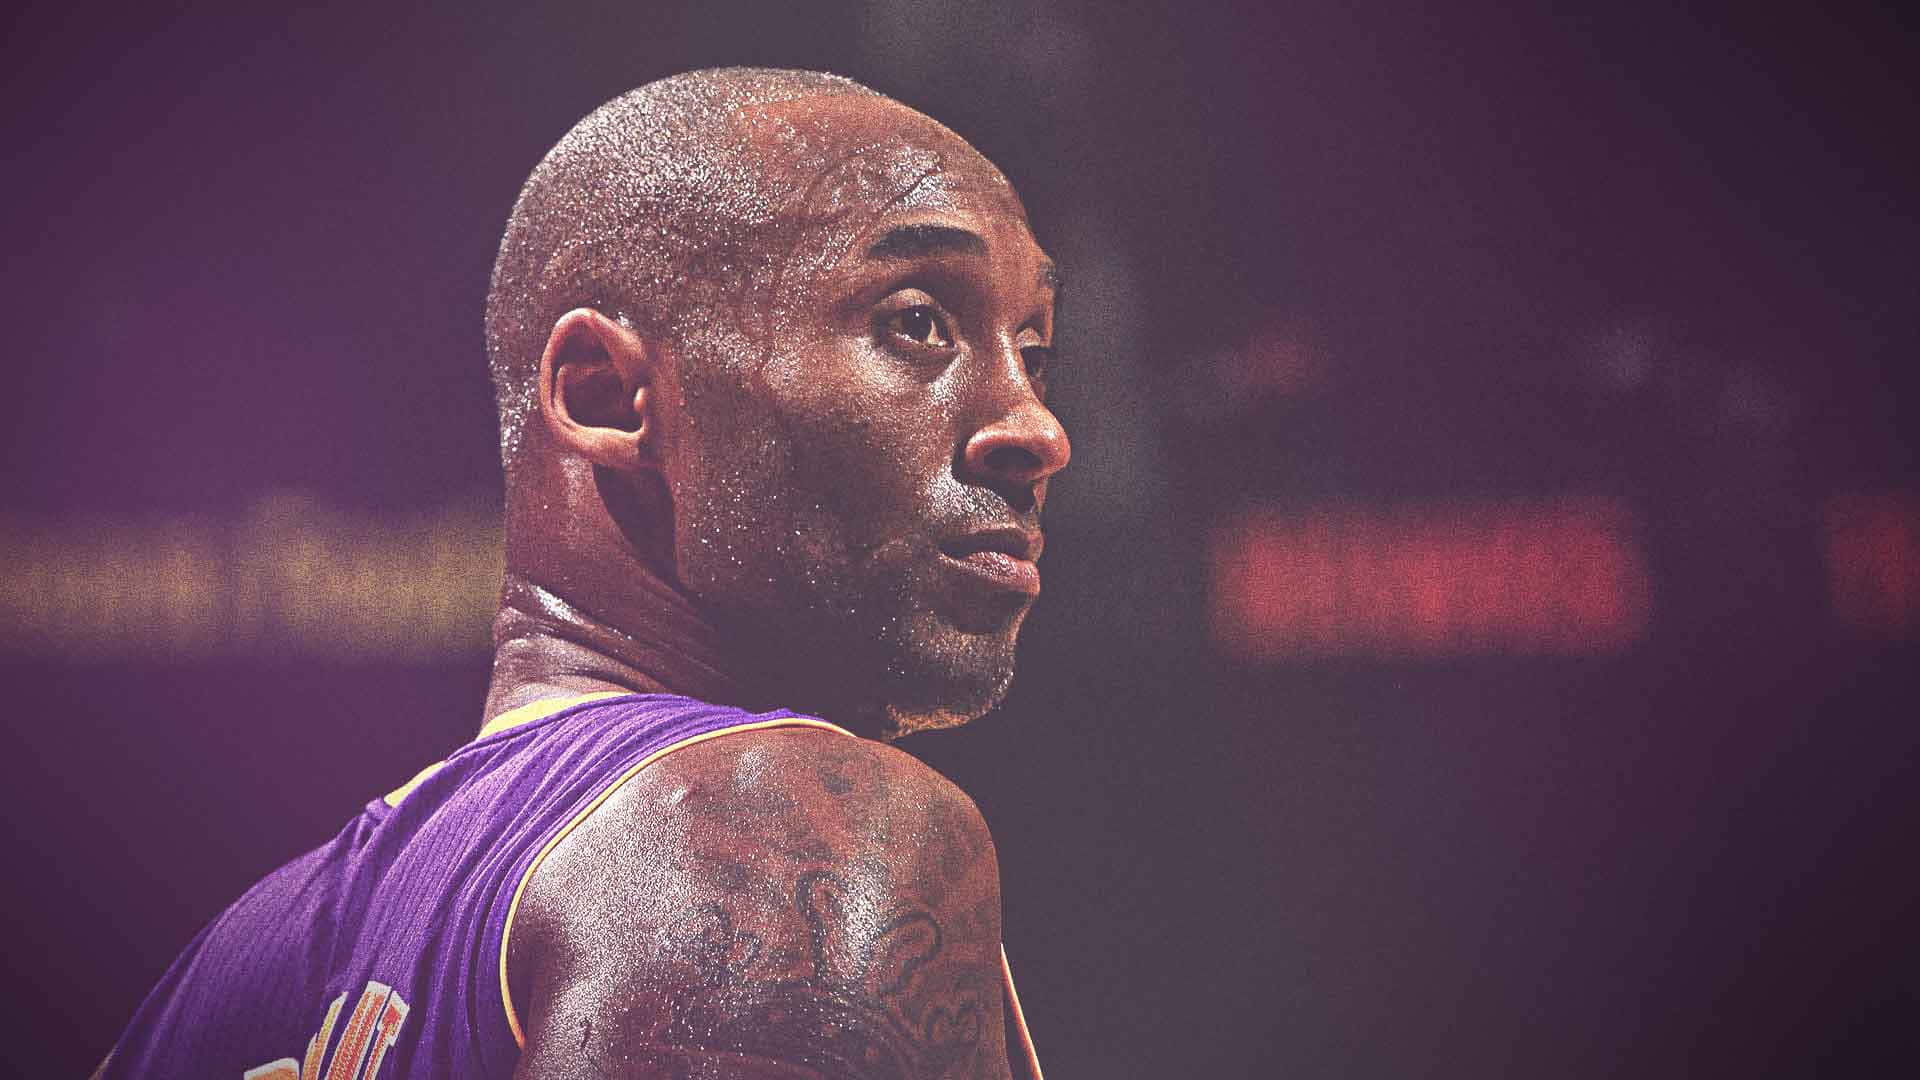 "Mamba Out: Honor and celebrate the legacy of Kobe Bryant" Wallpaper